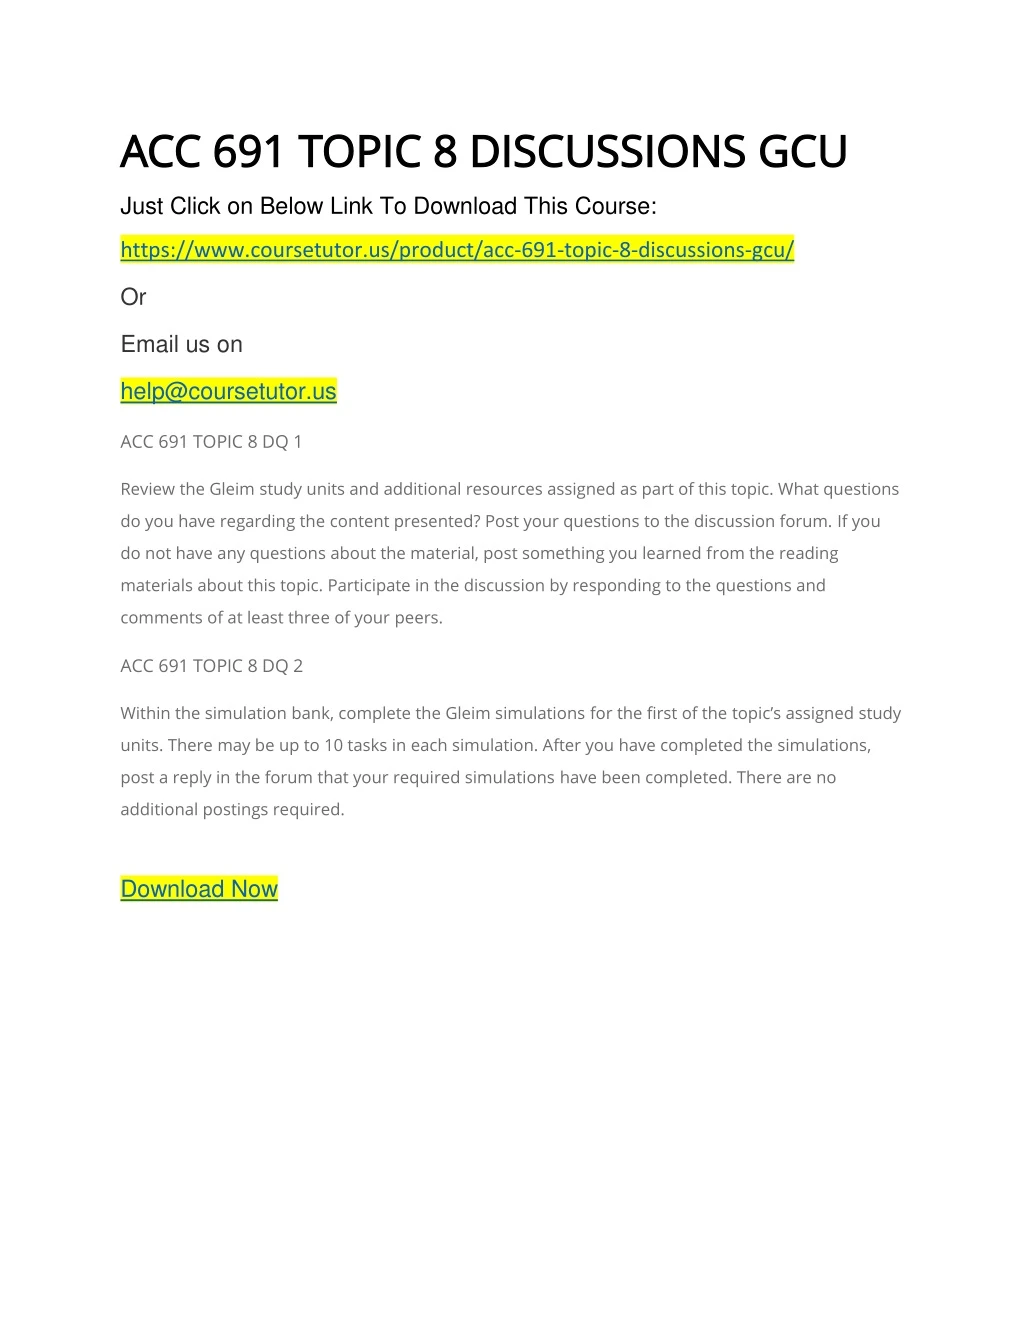 acc 691 topic 8 disc acc 691 topic 8 discussions